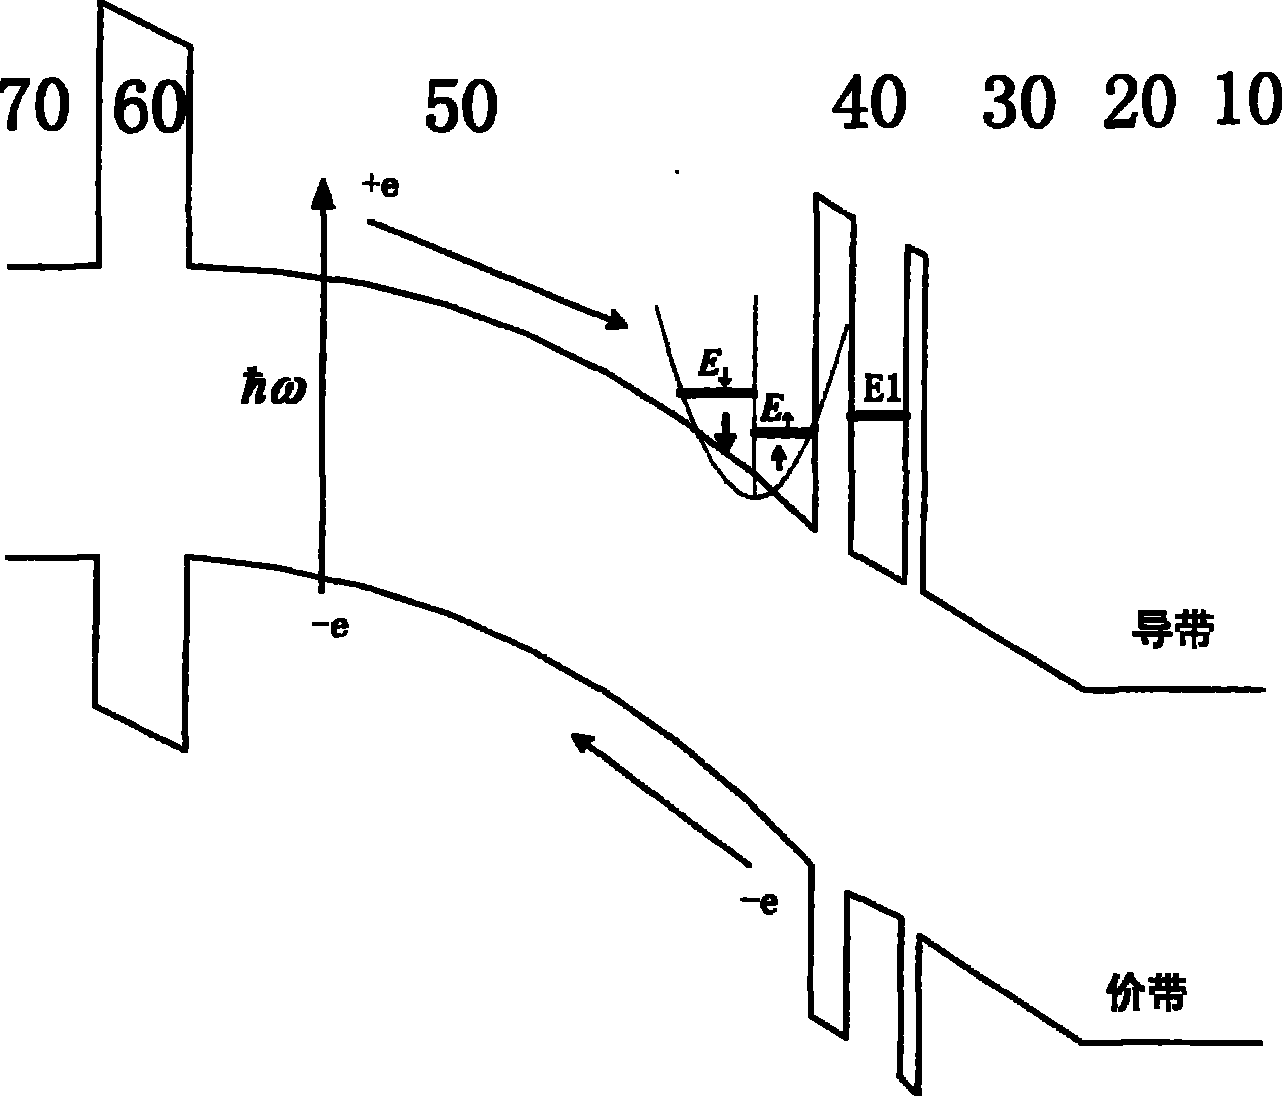 Optical spin injection method